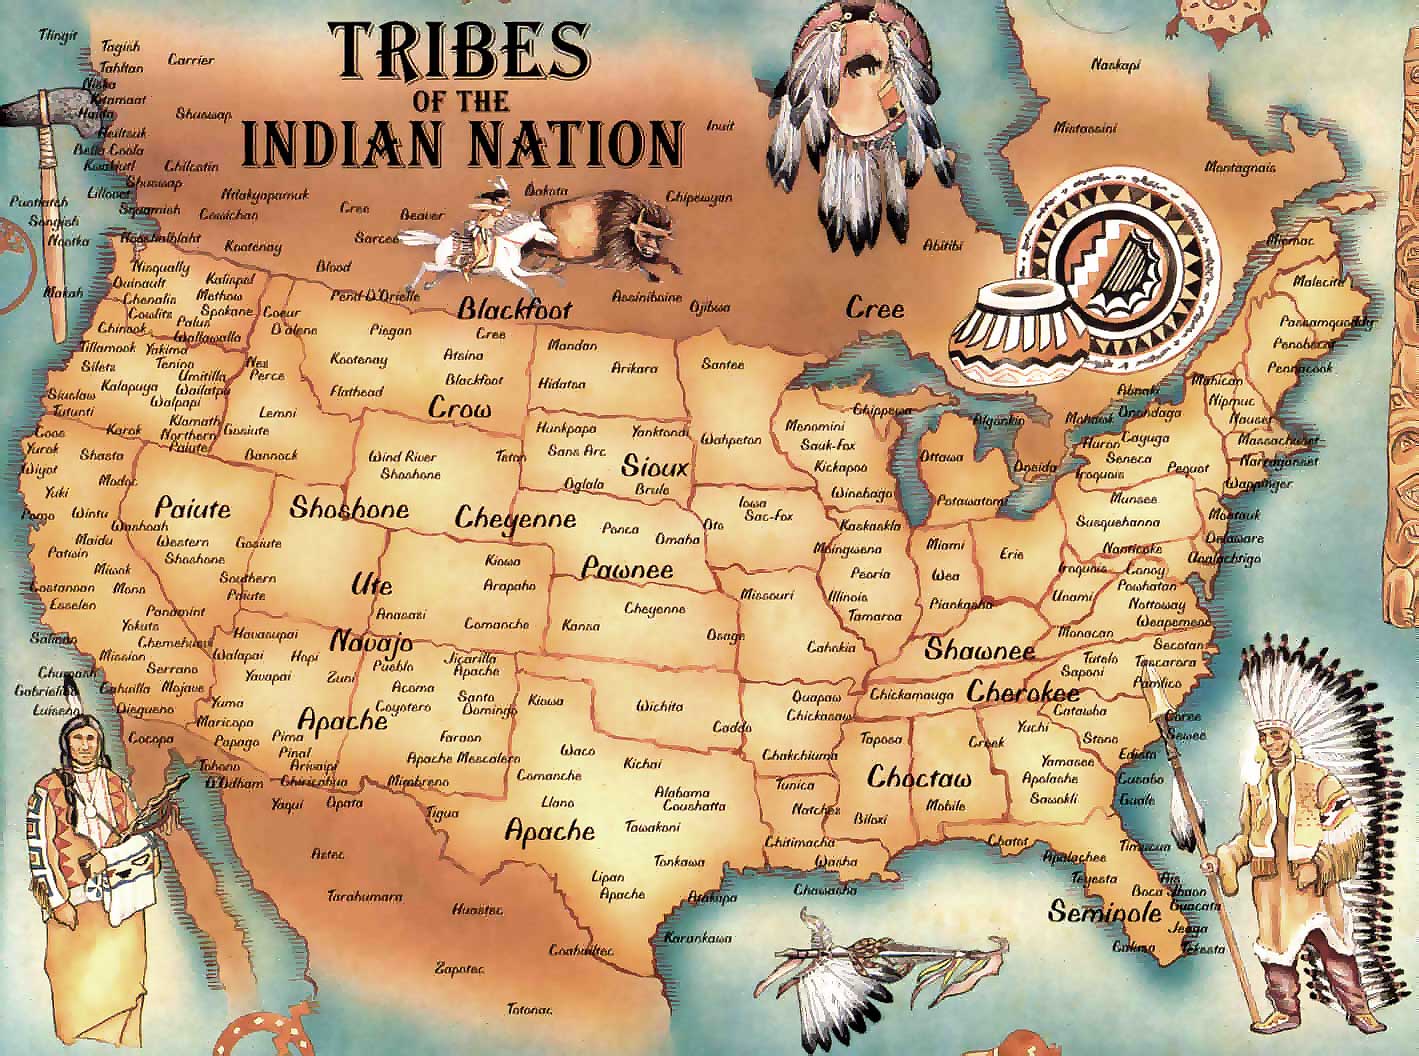 North American Indians say it's time to recognize their National